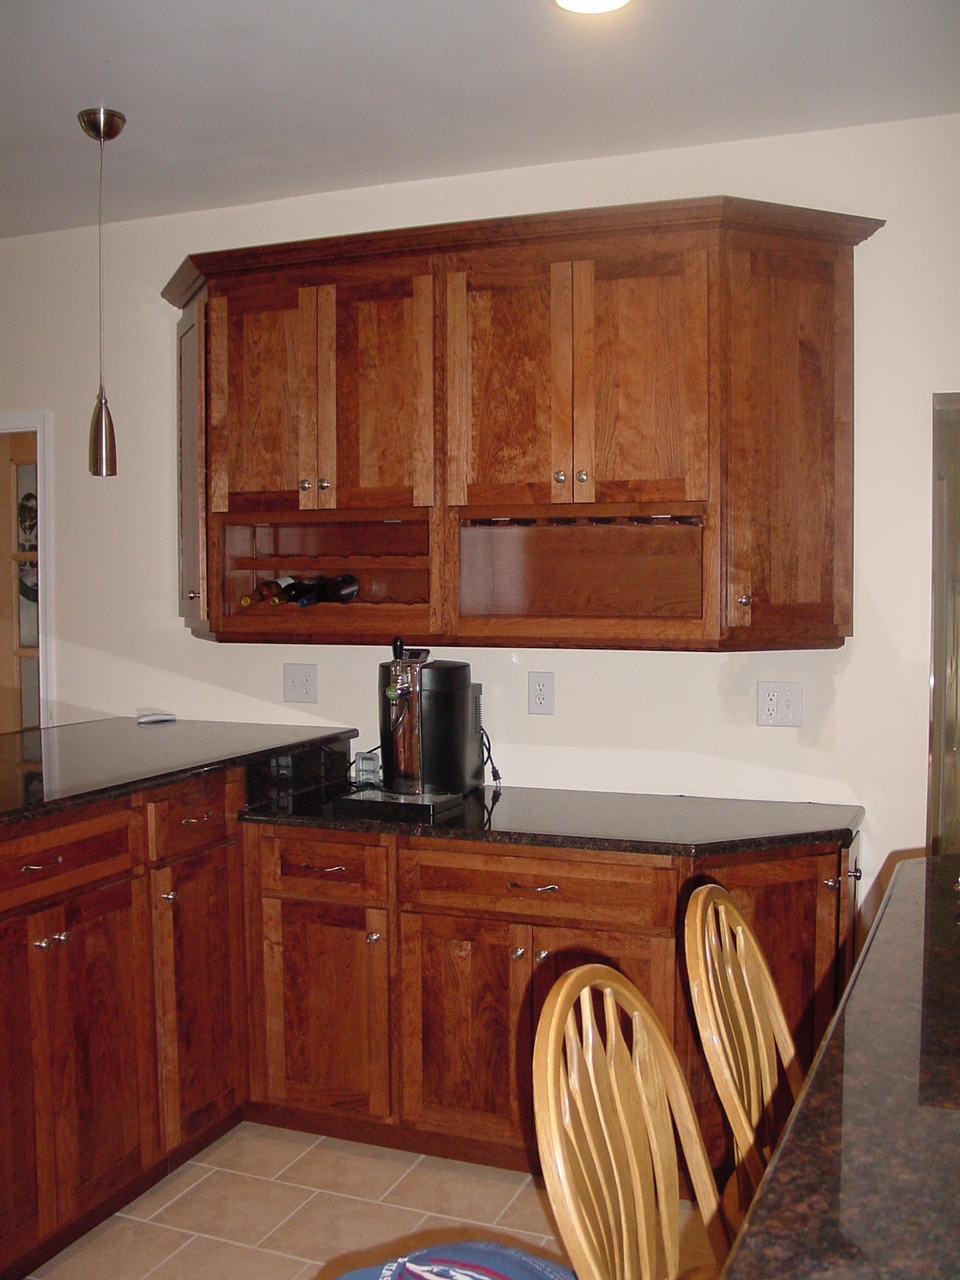 This Doylestown, New Britain, area shows a wall cabinet with wine bottles and glass stems area to give this kitchen a great custom area with all the added convenience to make cooking in your kitchen a pleasure.